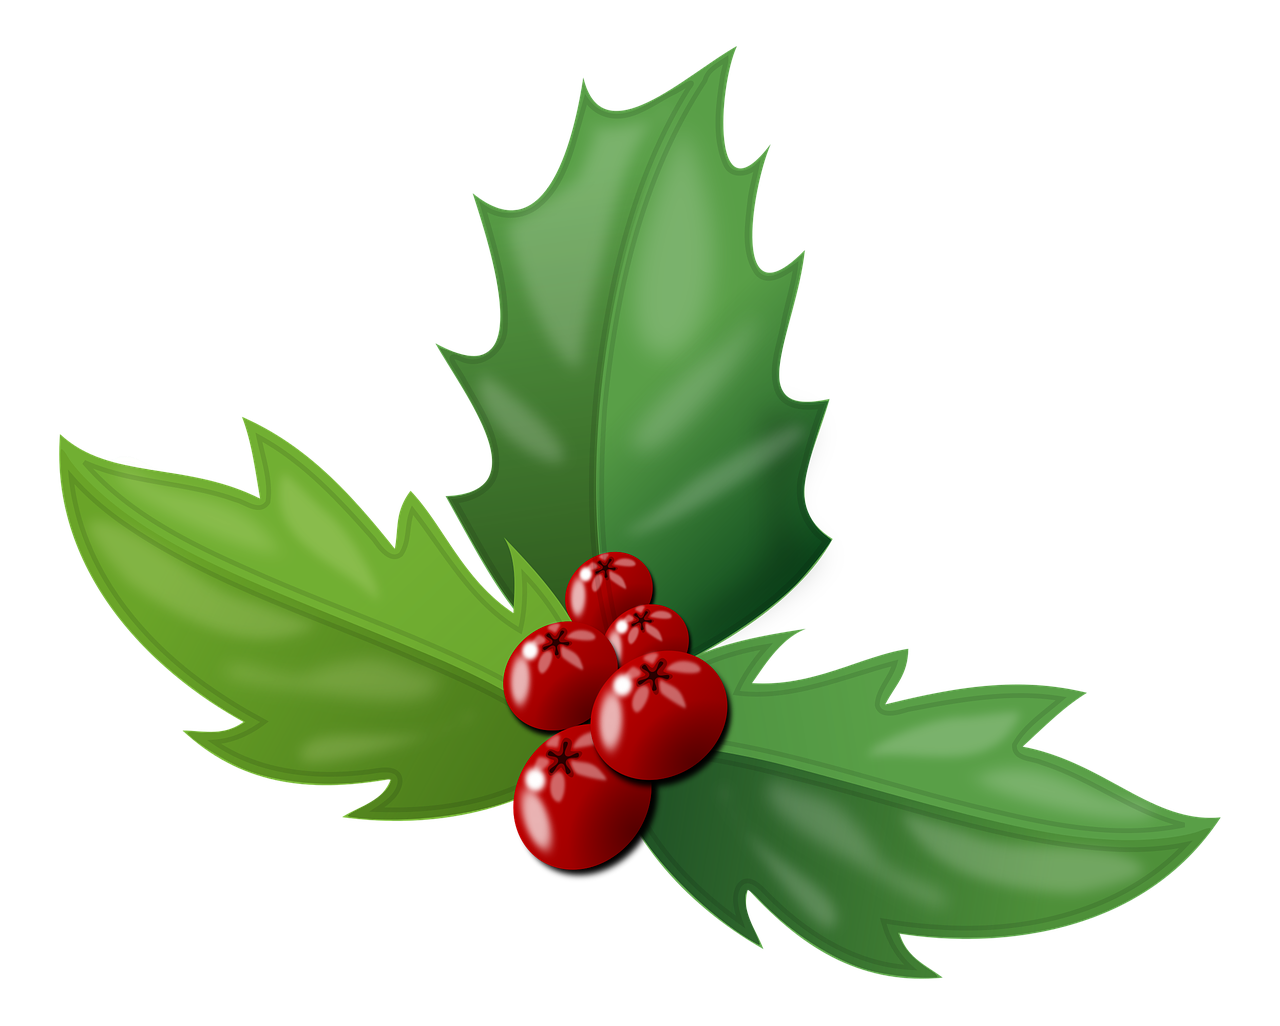 a holly branch with red berries and green leaves, a digital rendering, by Harold Elliott, on a black background, symbol, presents, so cute